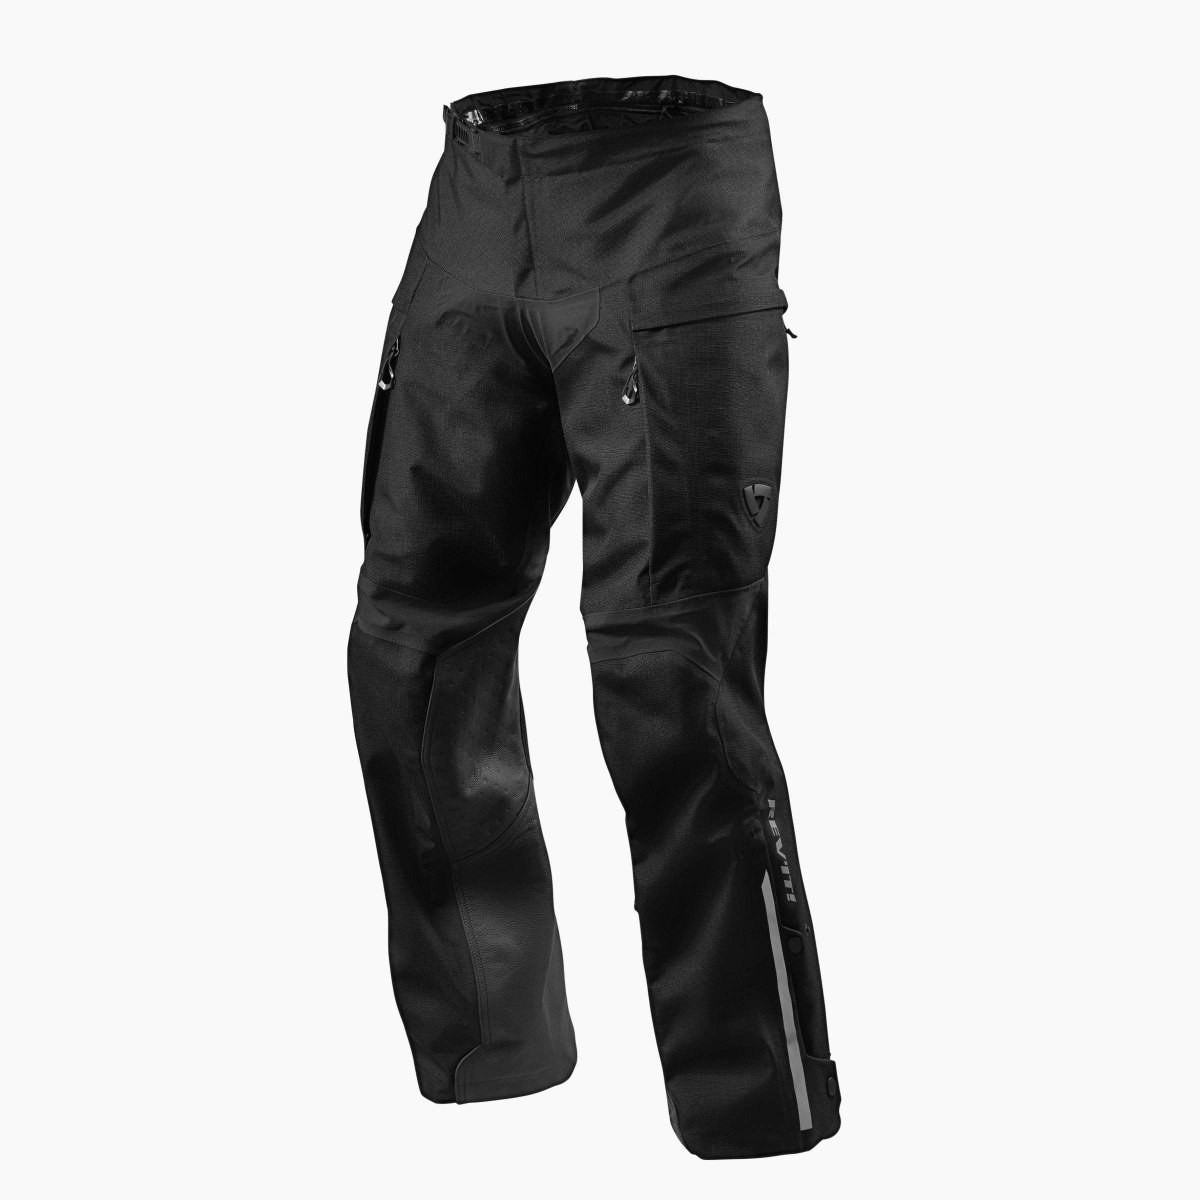 Image of REV'IT! Component H2O Long Black Motorcycle Pants Taille XL